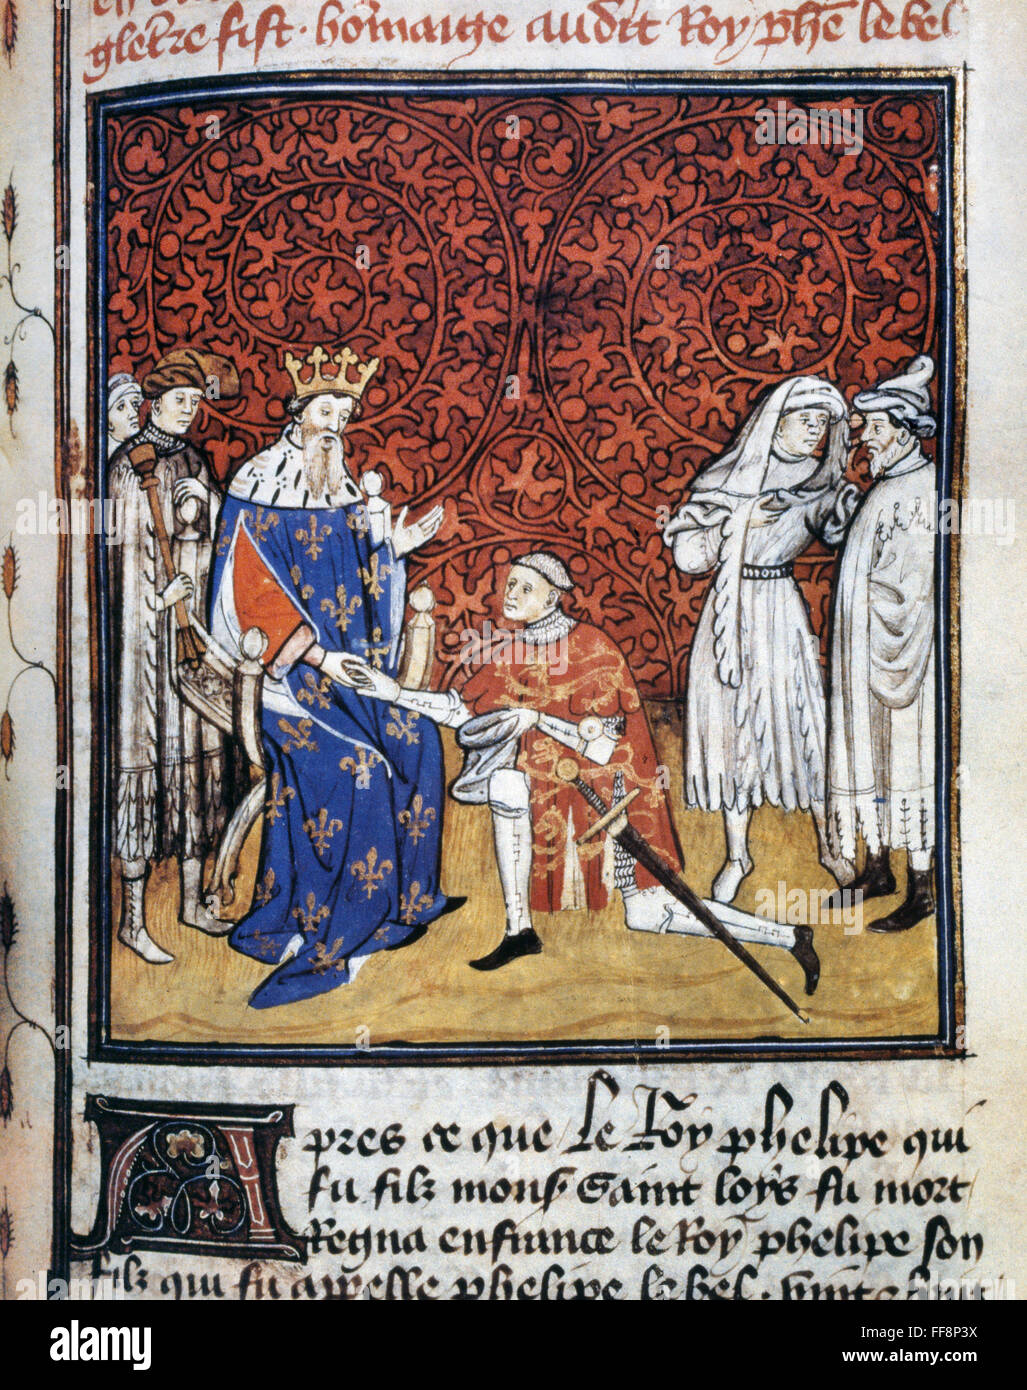 KING PHILIP IV OF FRANCE /n(1268-1314). Known as Philip the Fair. King of France, 1284-1314. The Prince of Wales (later King Edward II of England) paying homage to King Philip IV of France in 1304. French ms. illumination, c1420. Stock Photo